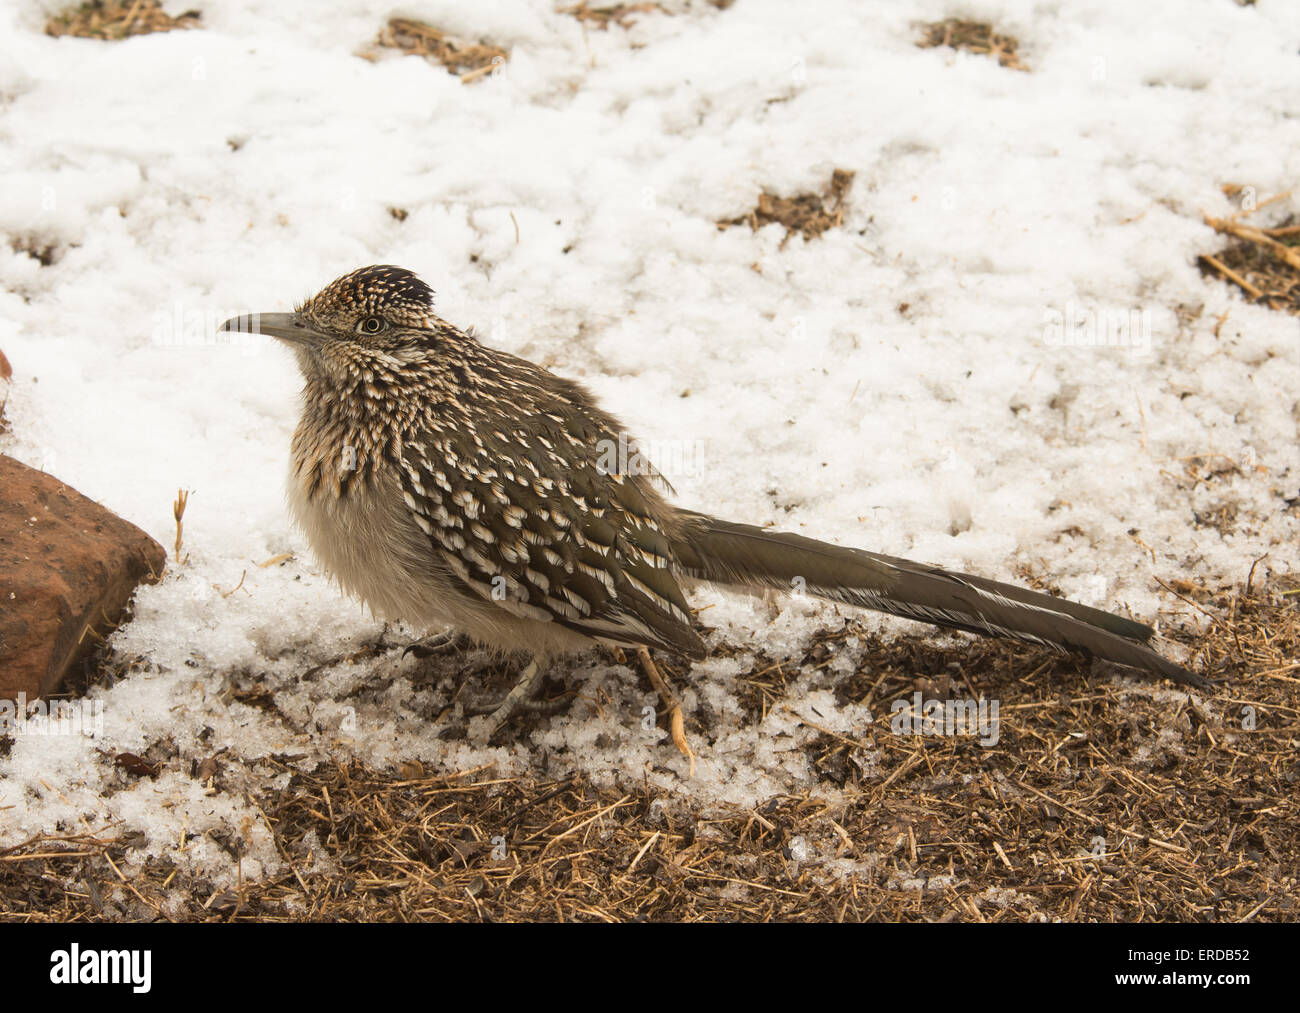 Greater Roadrunner waiting for prey on the edge of a snowy patch Stock Photo